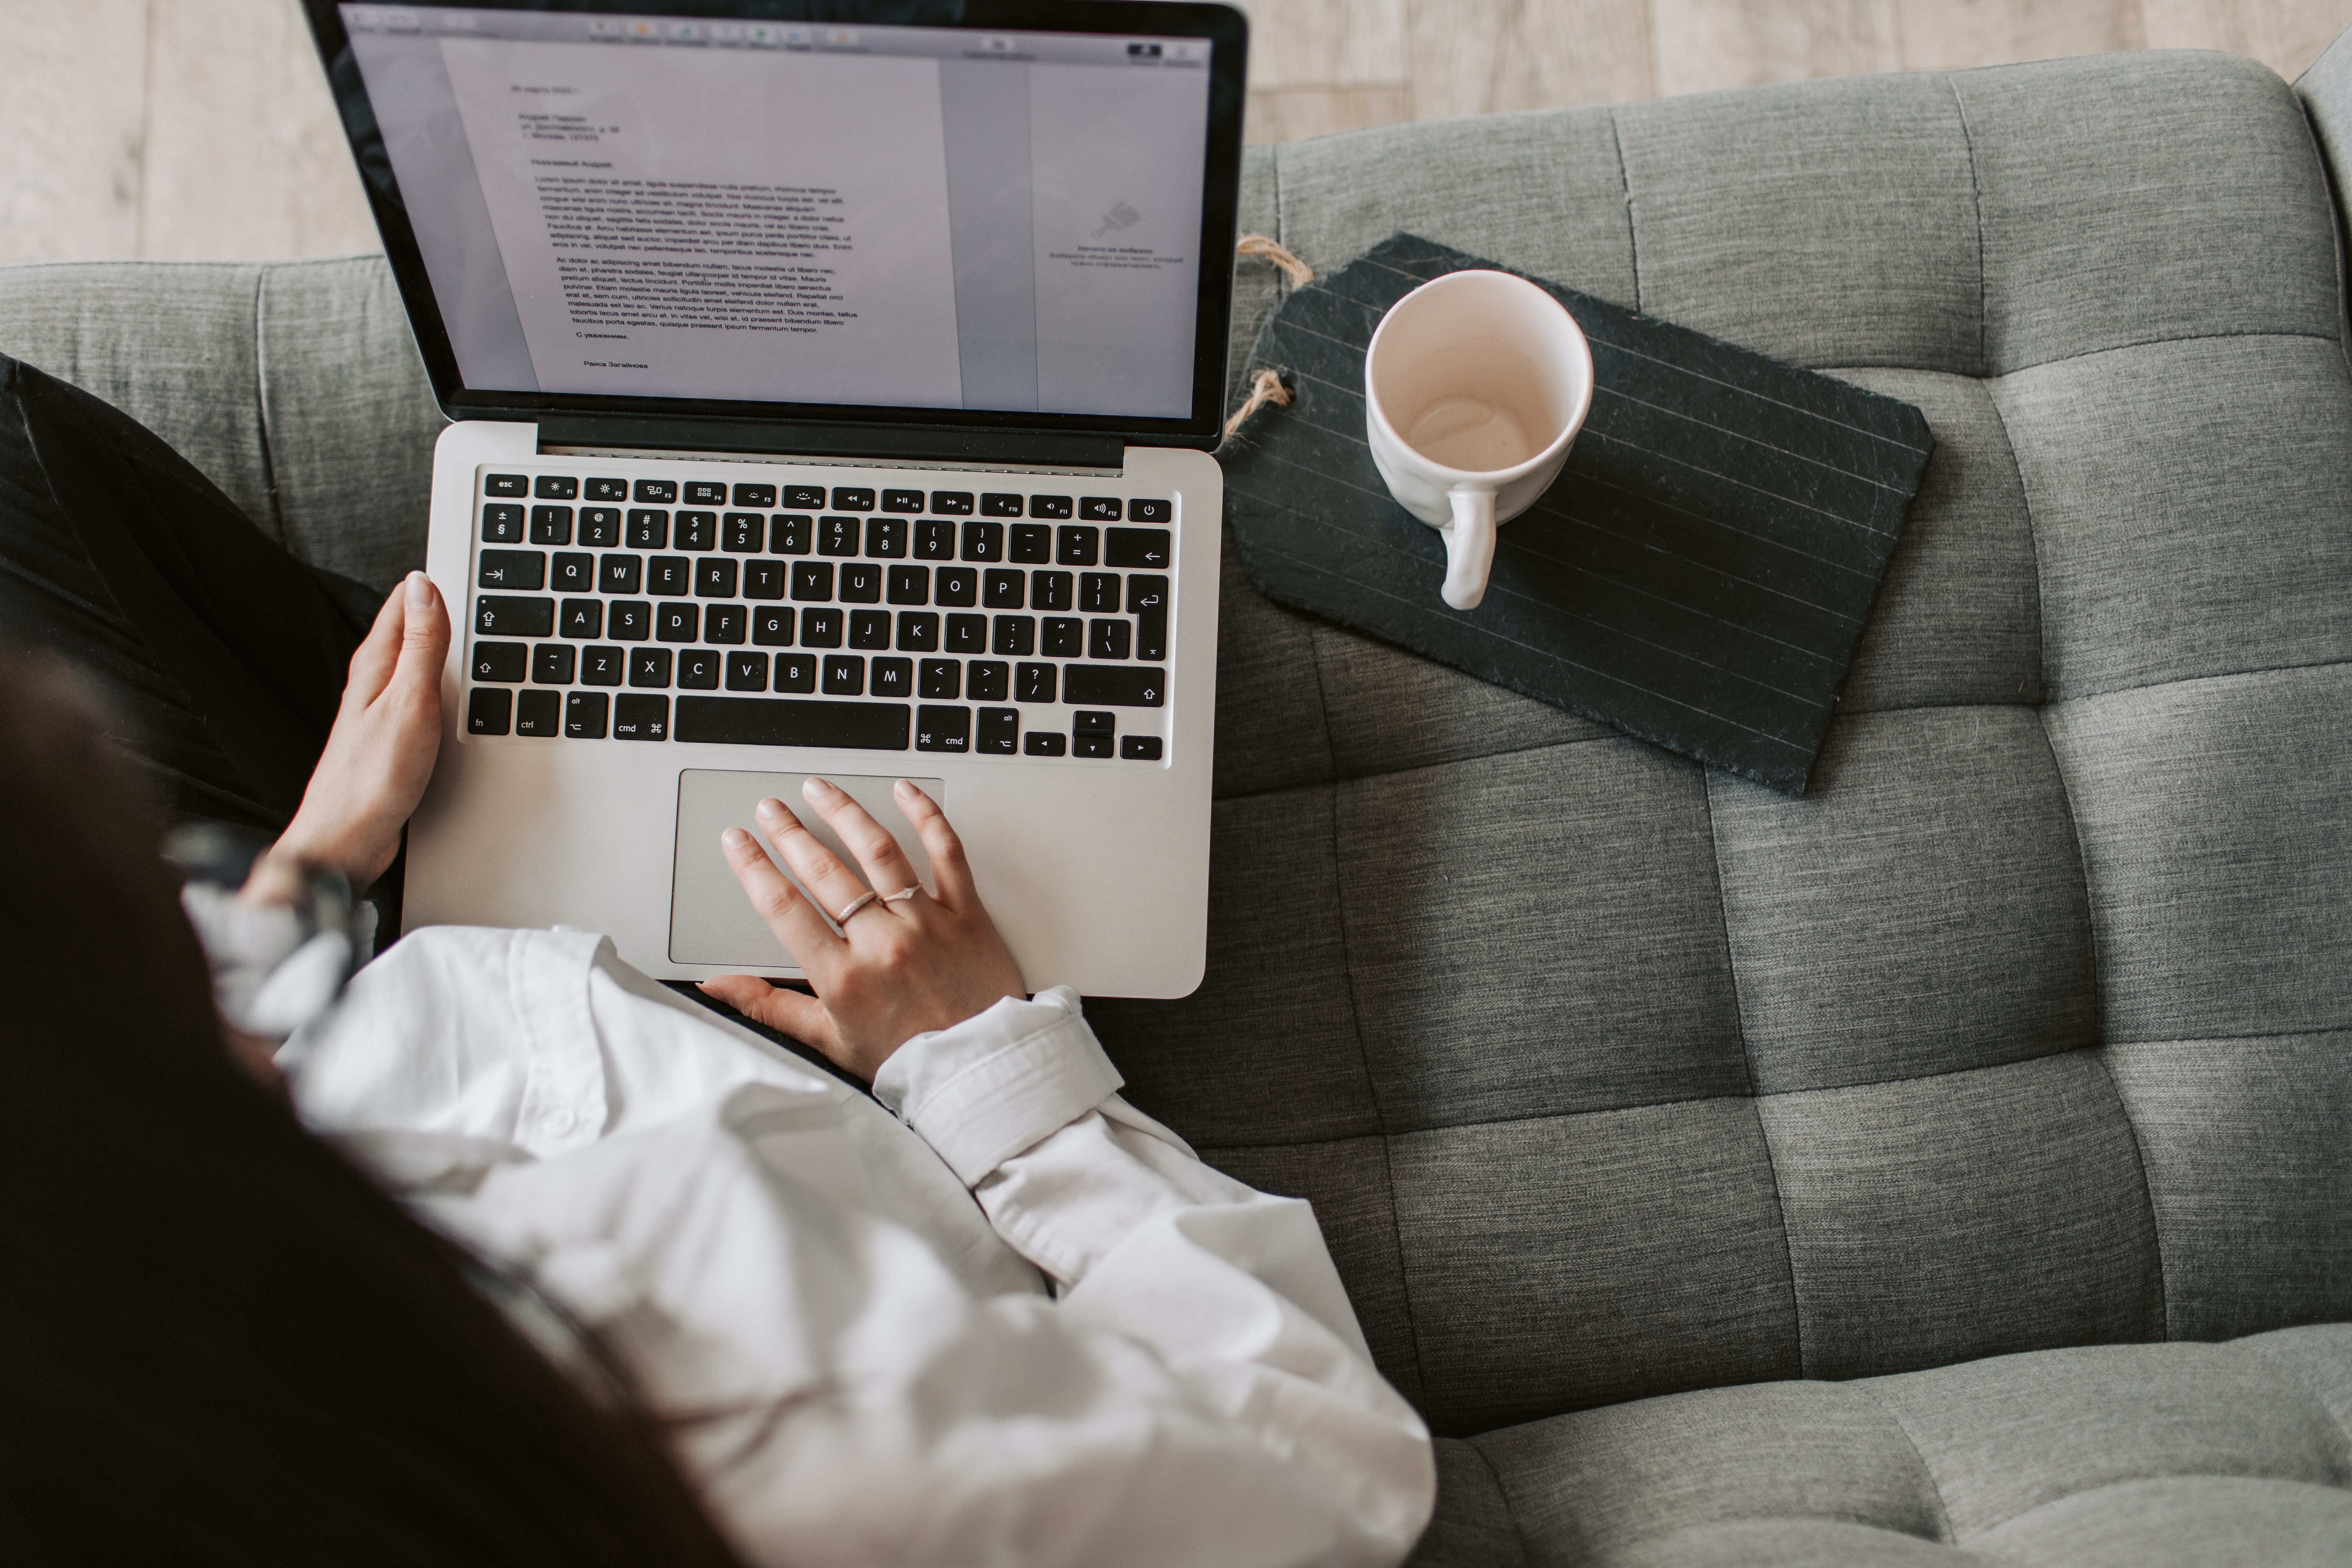 woman writing a letter on a laptop while sitting on a couch next to an empty cup of coffee